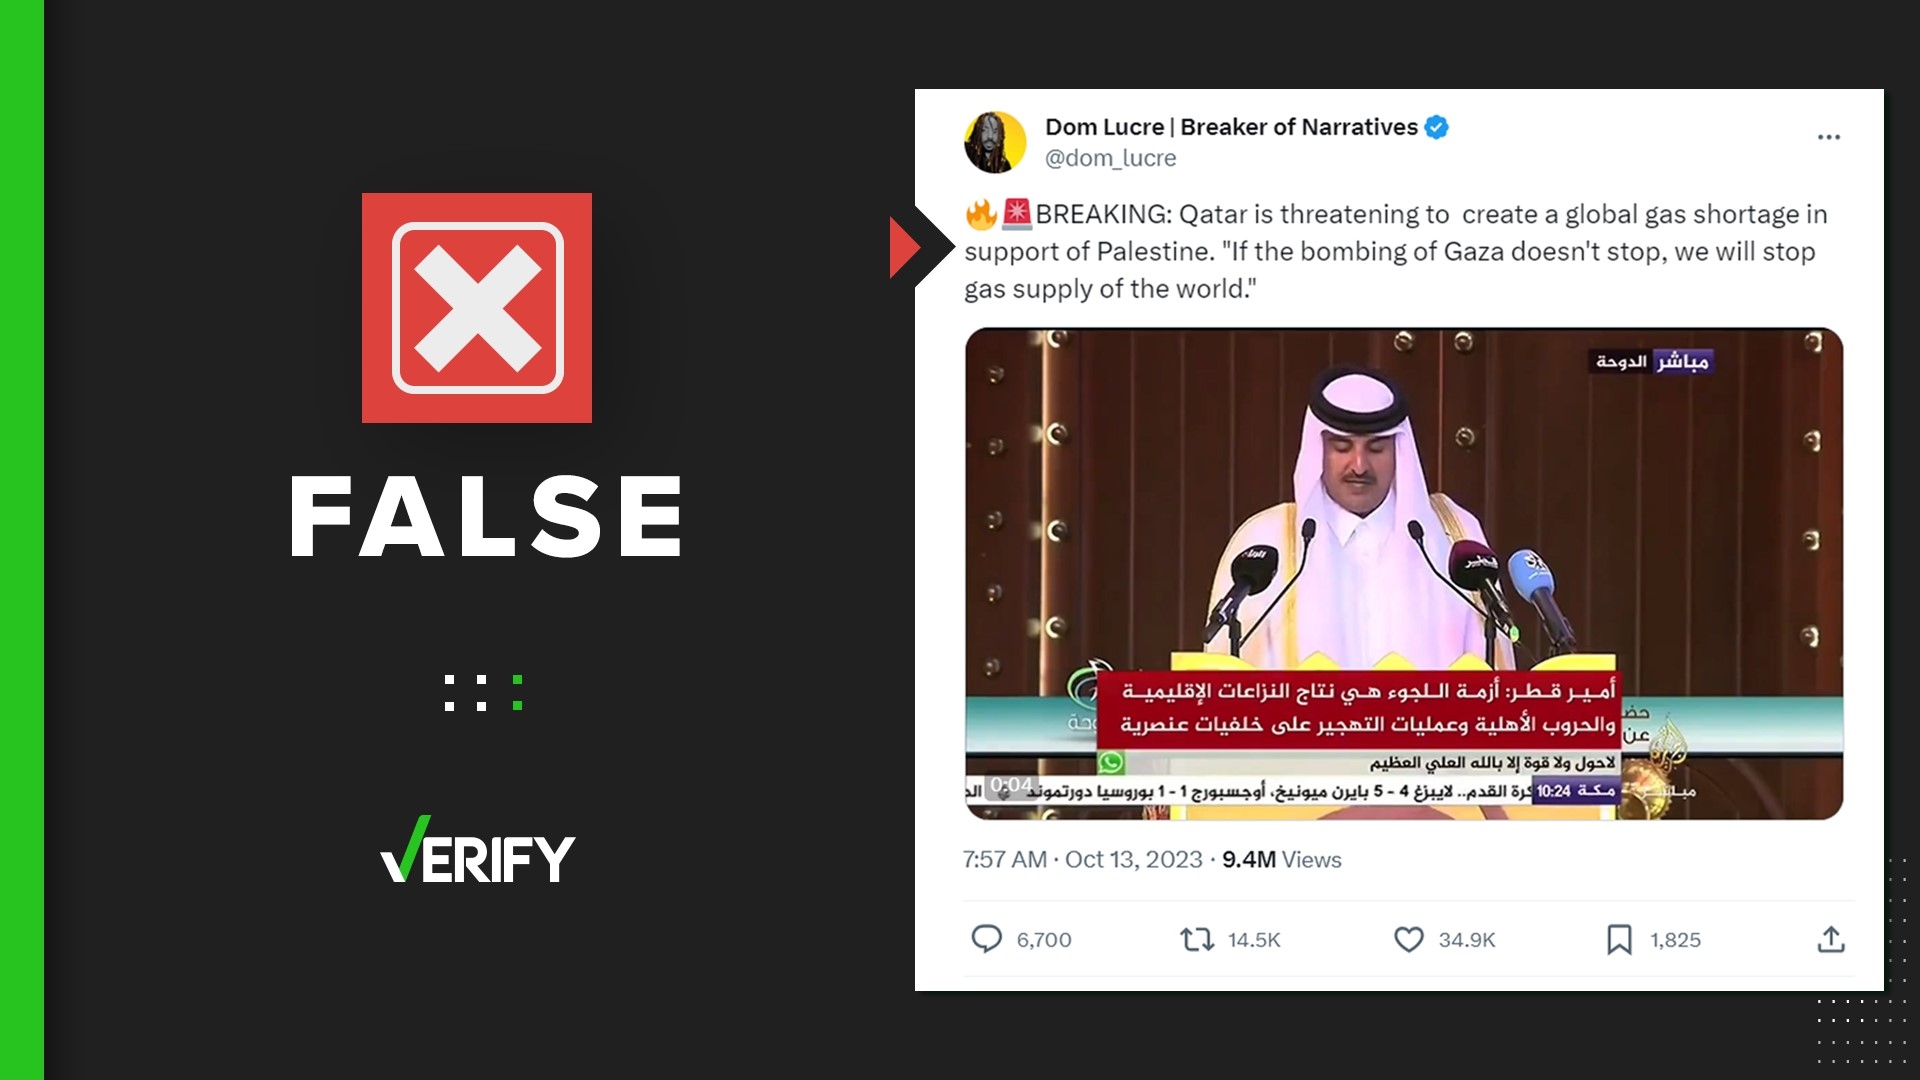 VERIFY confirmed this video doesn’t show the Qatari ruler, known as the emir, threatening the world’s gas supply.